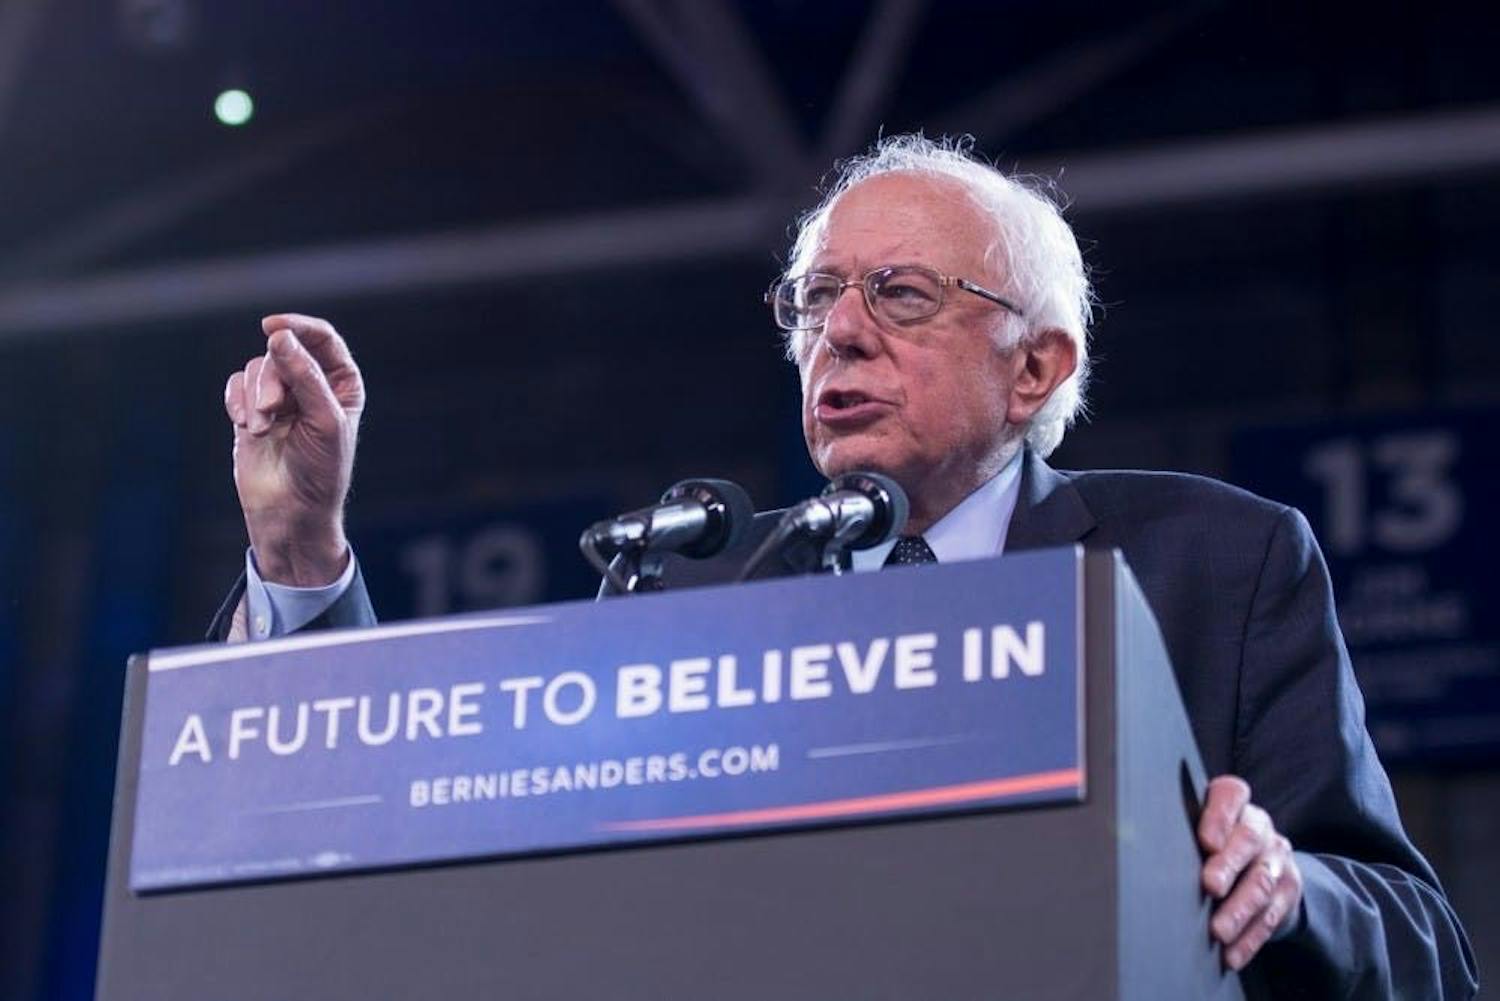 2020 presidential candidate Bernie Sanders looks out at his supporters during his "A Future to Believe In" rally in Alumni Arena in 2016.